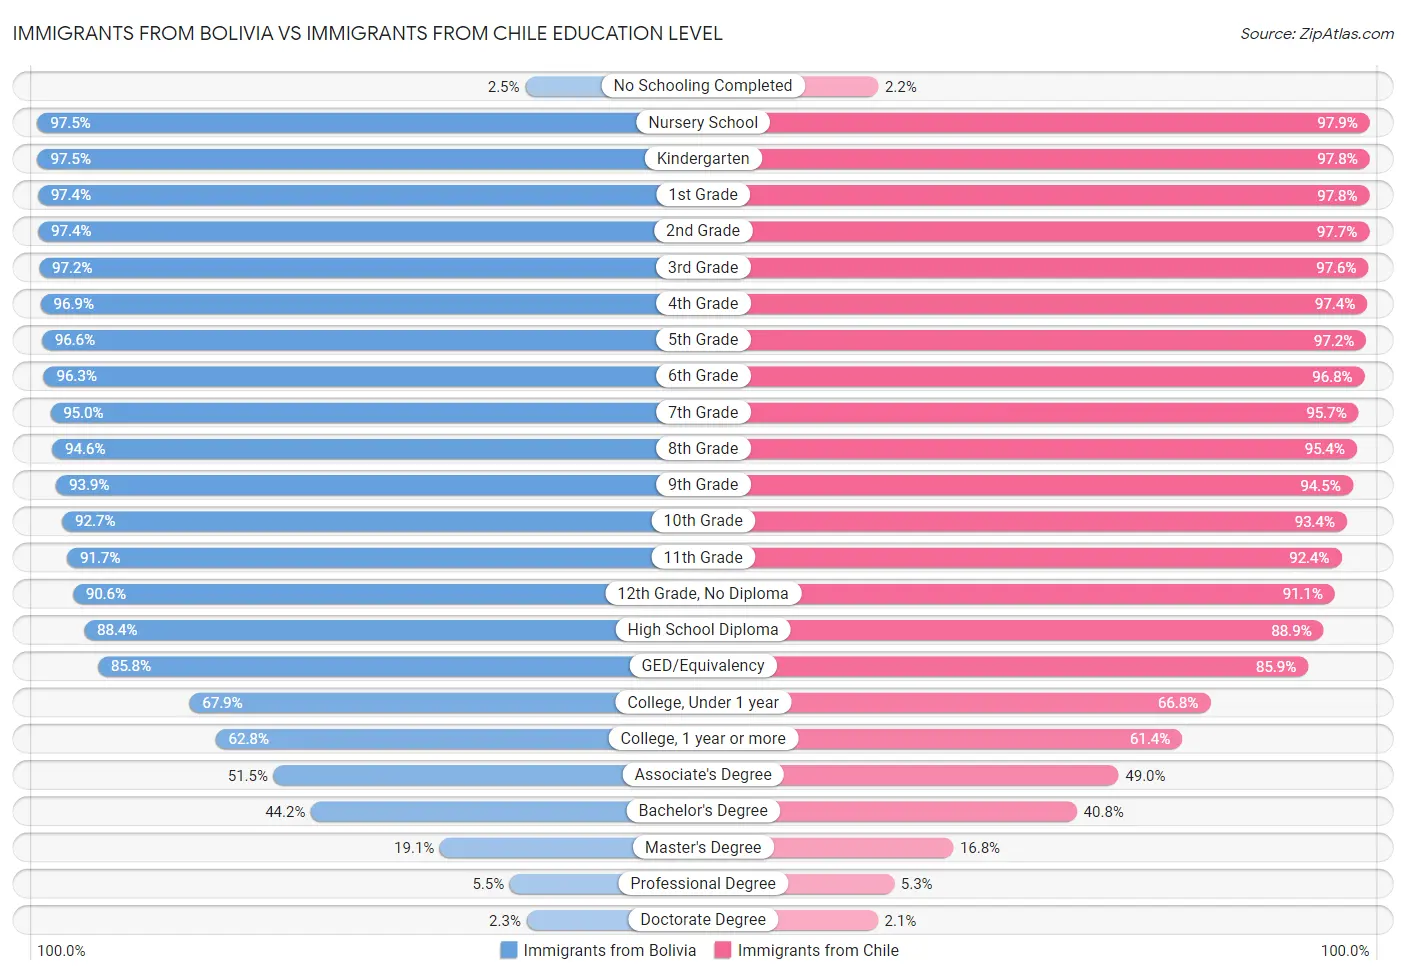 Immigrants from Bolivia vs Immigrants from Chile Education Level